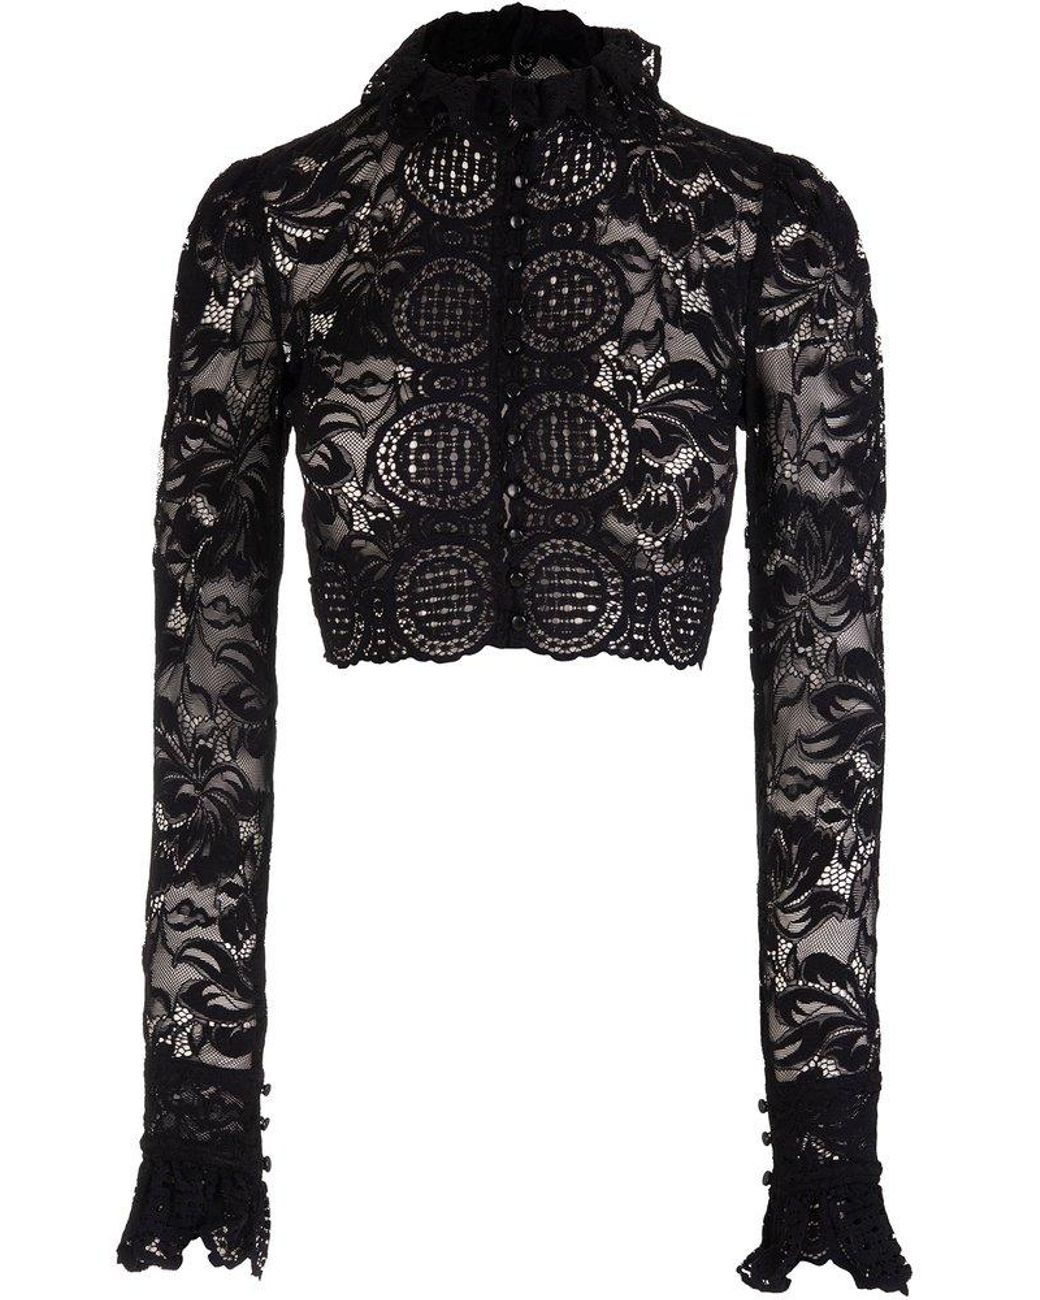 Paco Rabanne Crop Shirt In Black Lace | Lyst